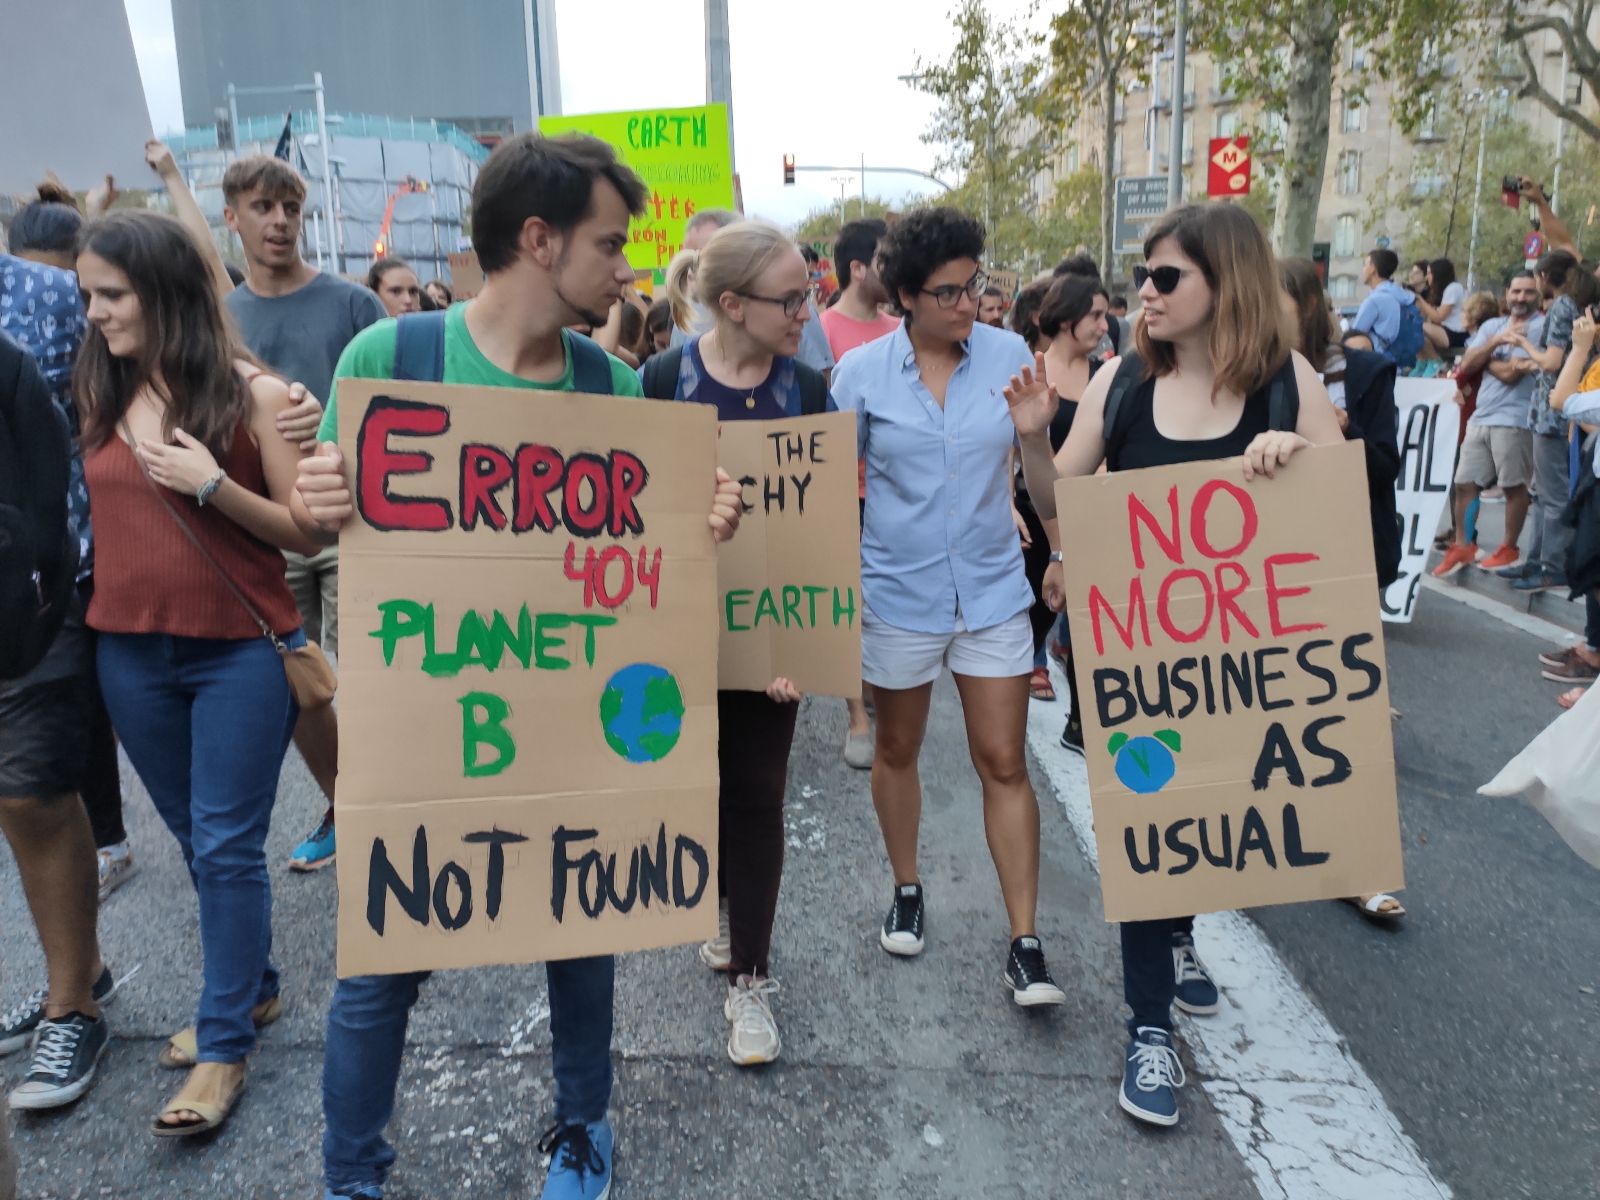 Image of protestors holding signs saying Error 404, Planet B not found and no more business as usual